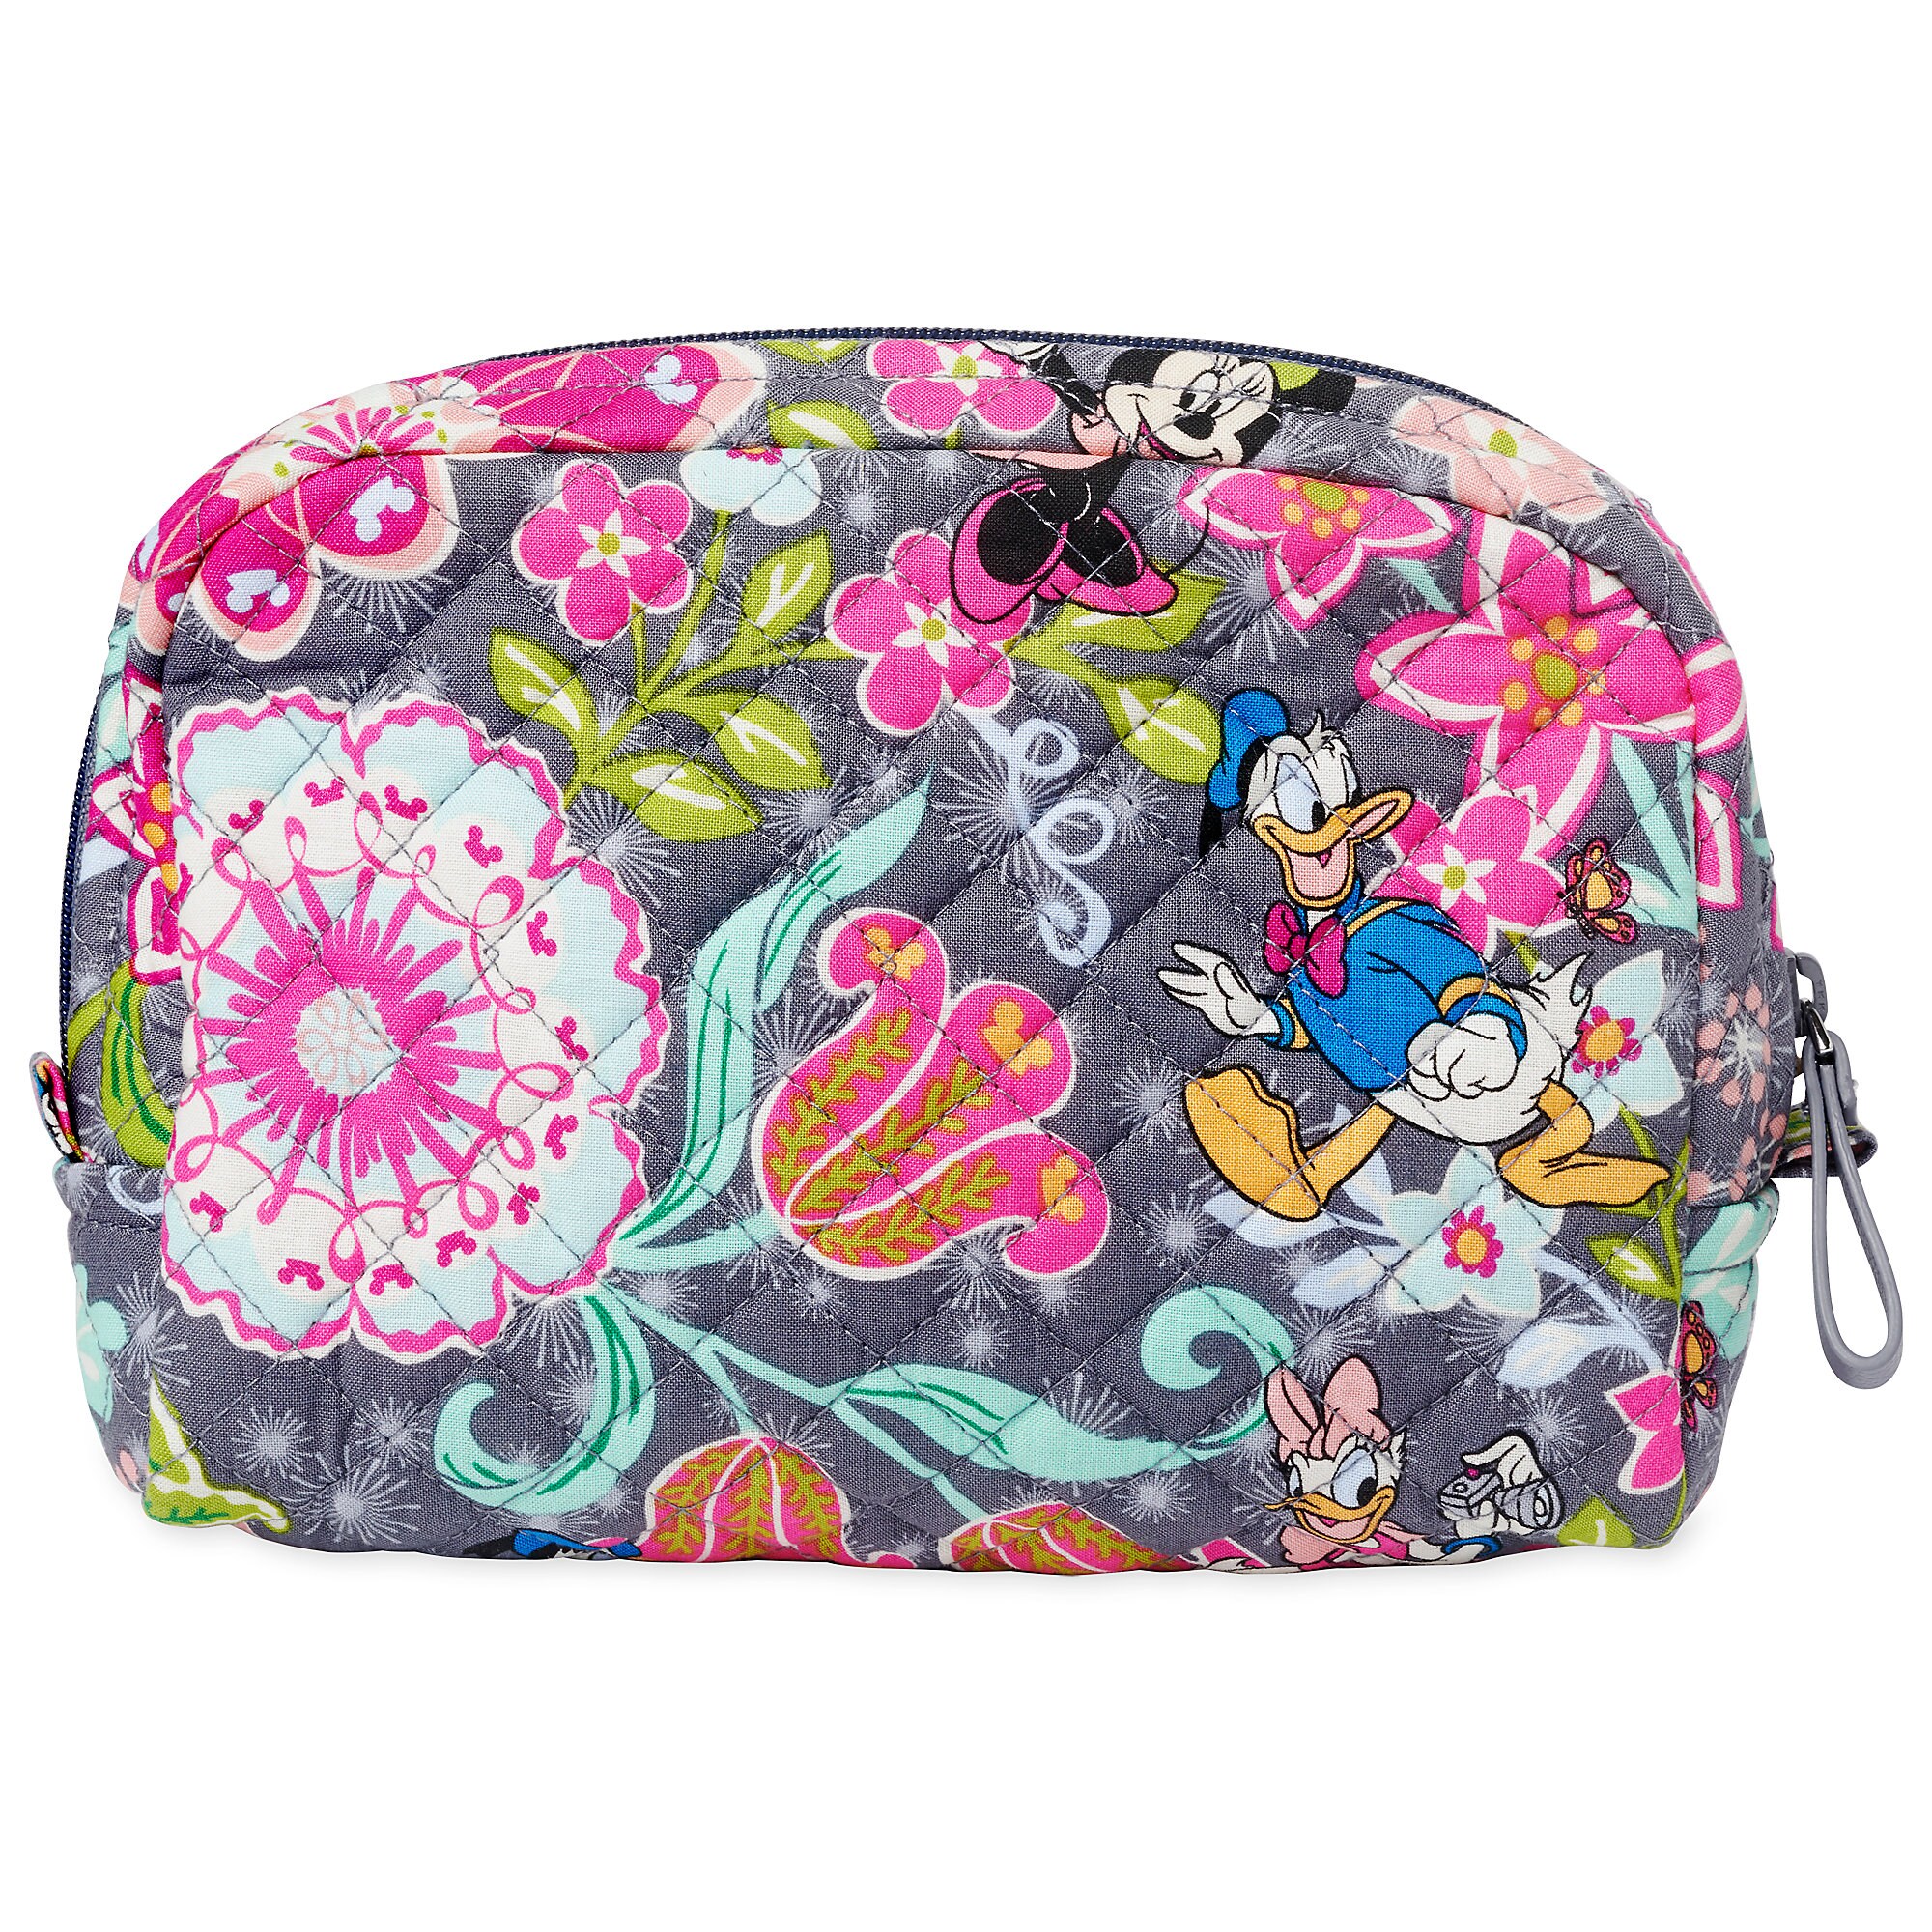 Mickey Mouse and Friends Medium Cosmetic Bag by Vera Bradley